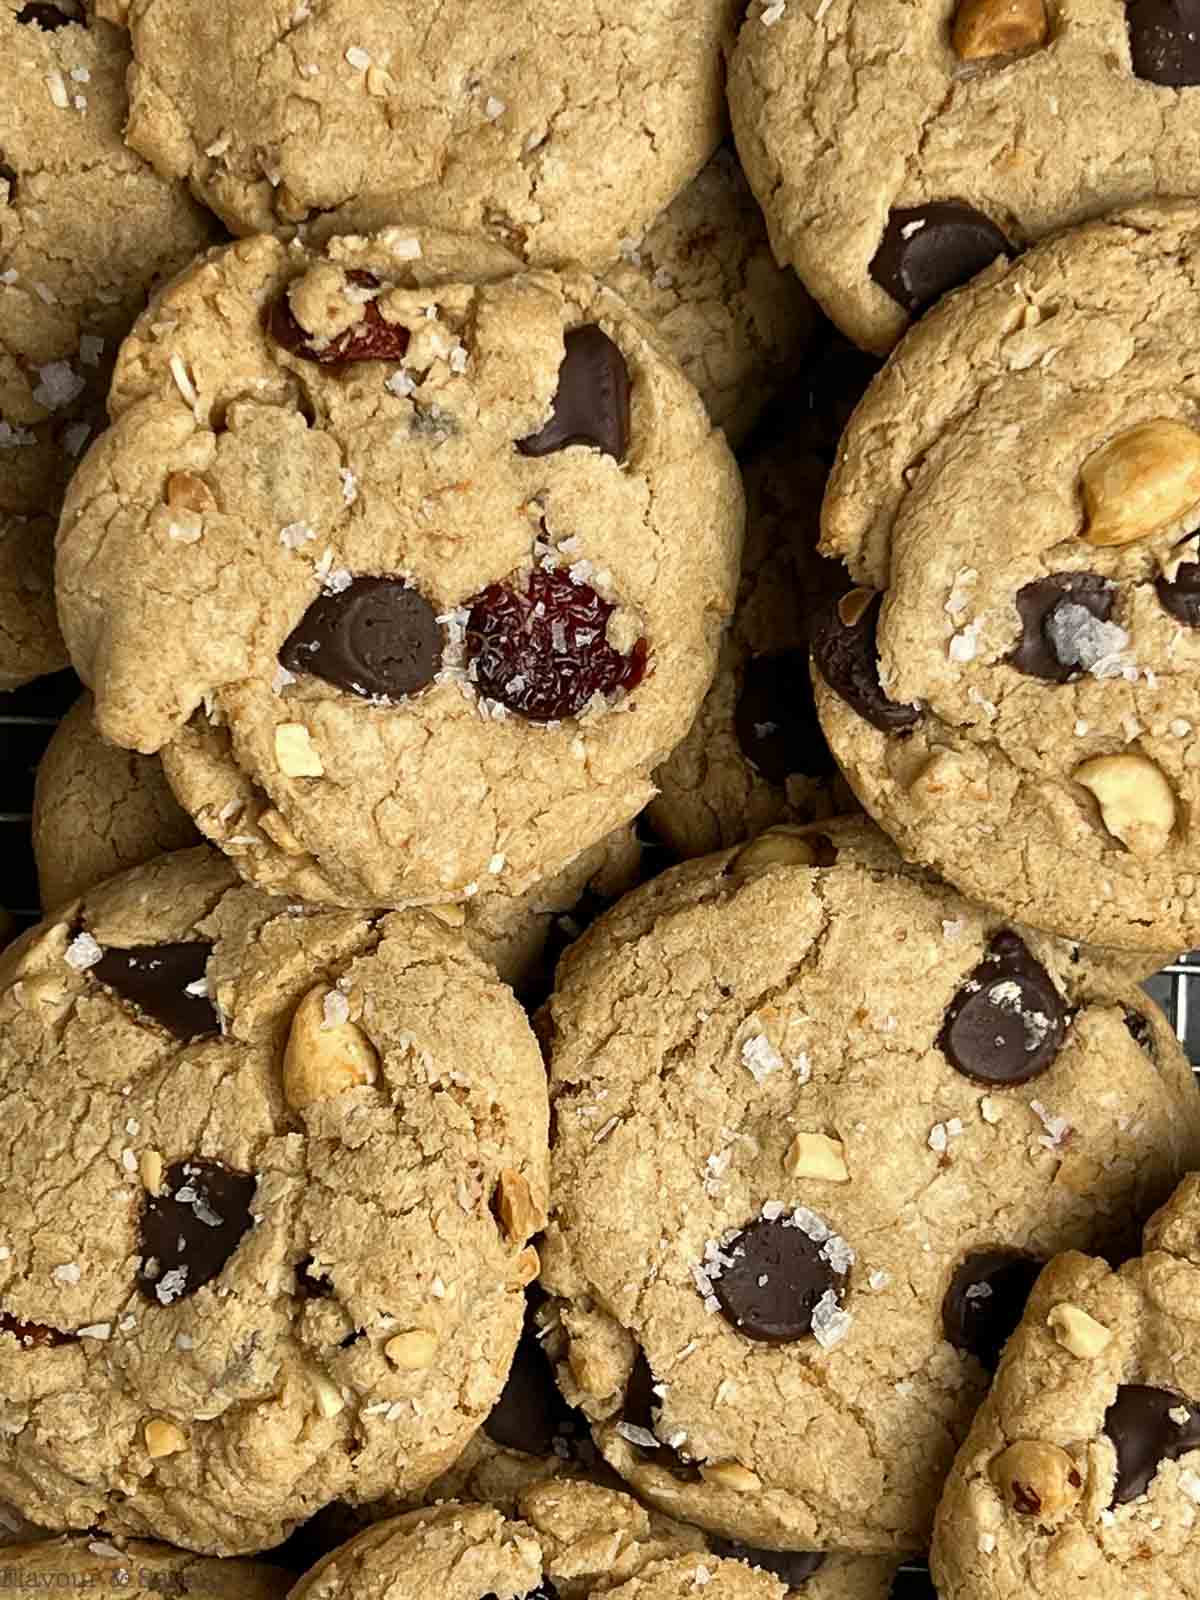 Close up view of gluten-free Kitchen Sink Cookies with chocolate chips, peanuts, raisins and dried cranberries.